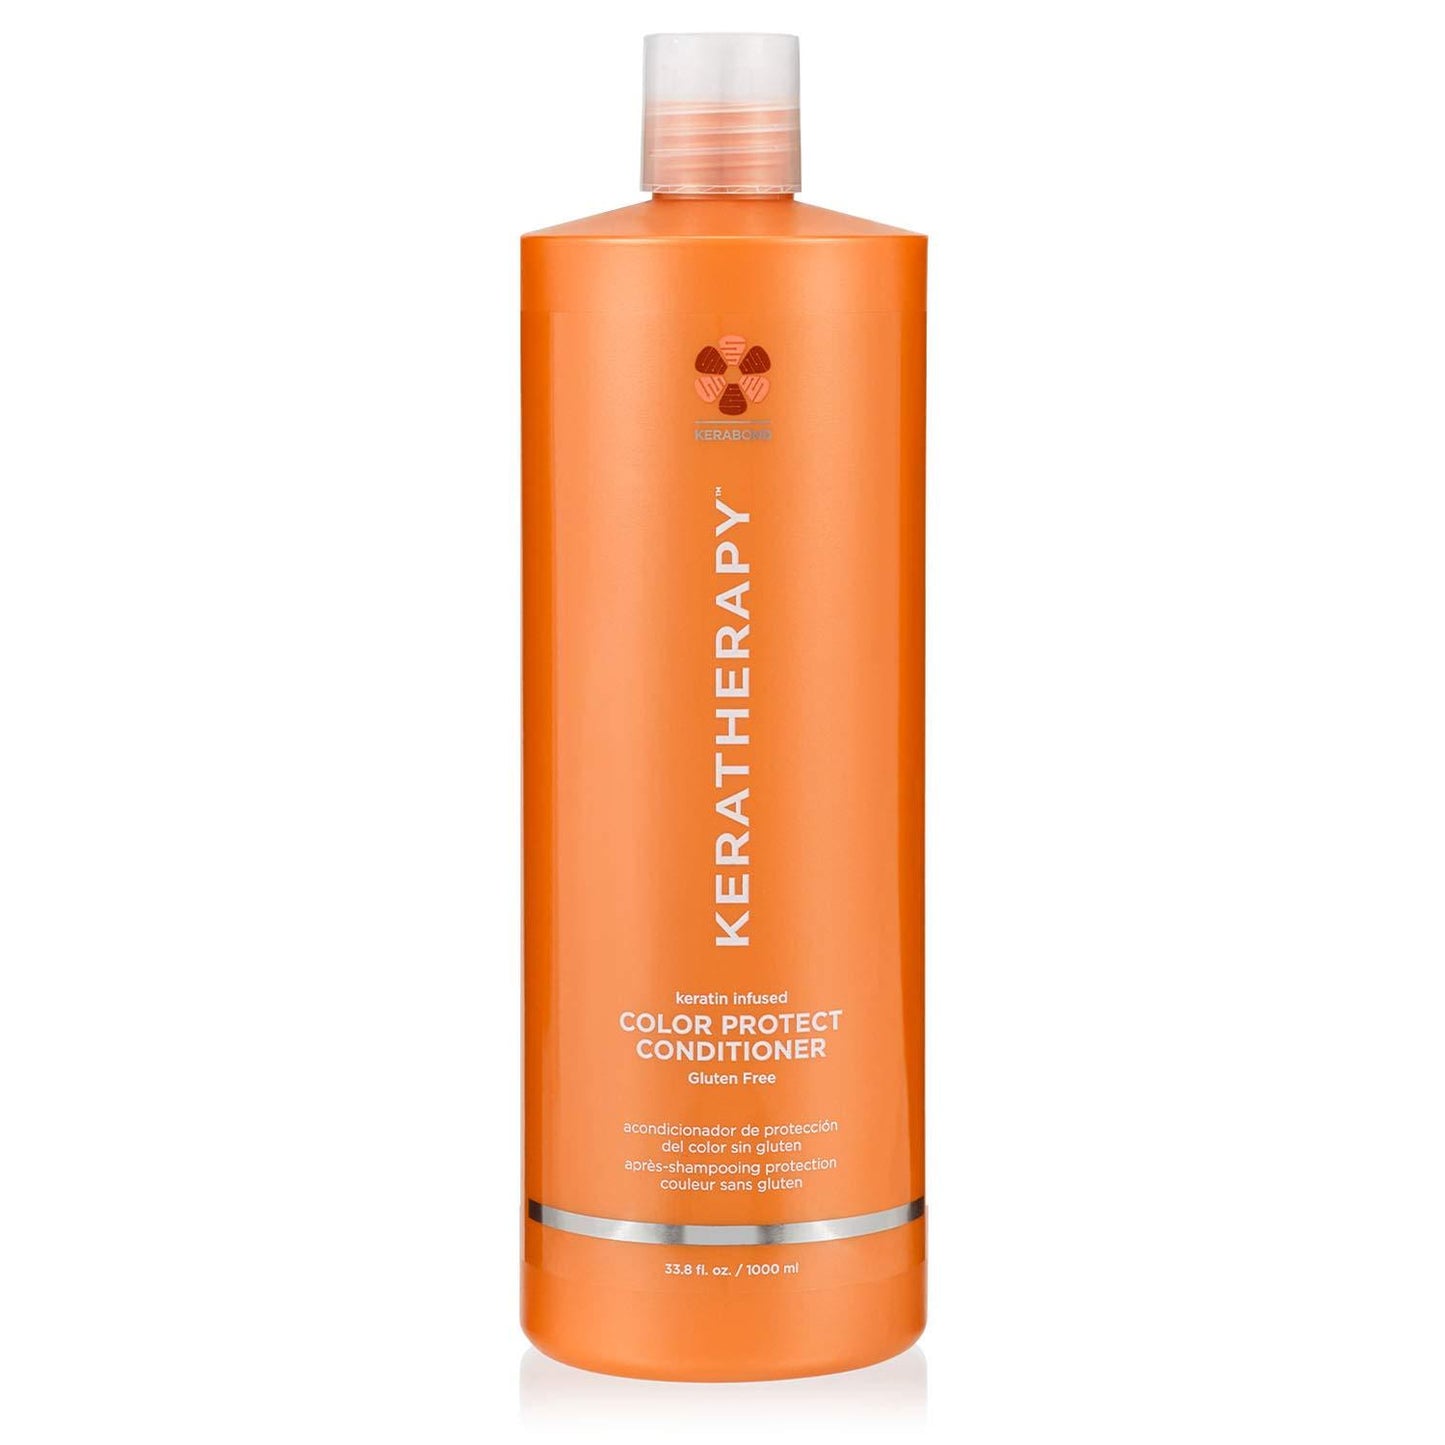 Keratherapy Keratin infused Color Protect Conditioner